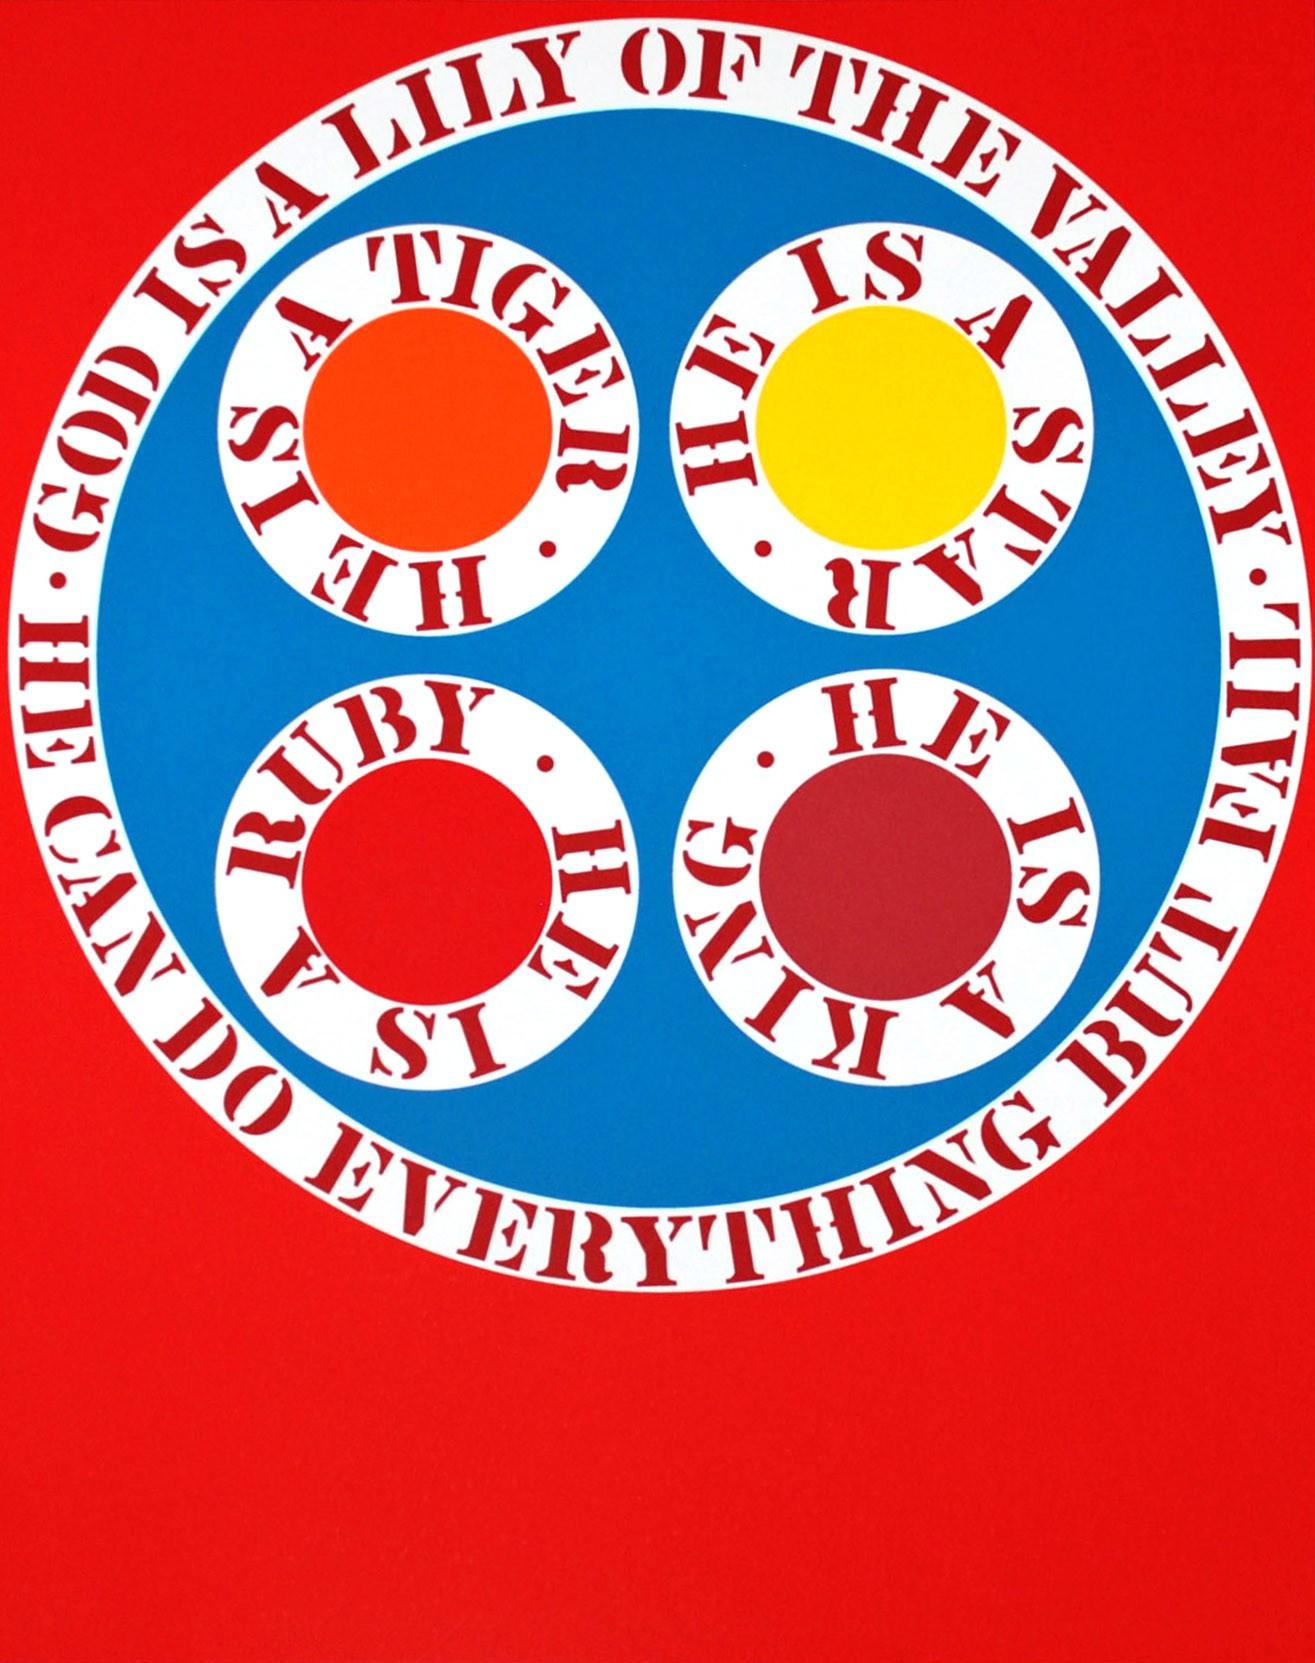 God is Lily of the Valley - Print by Robert Indiana